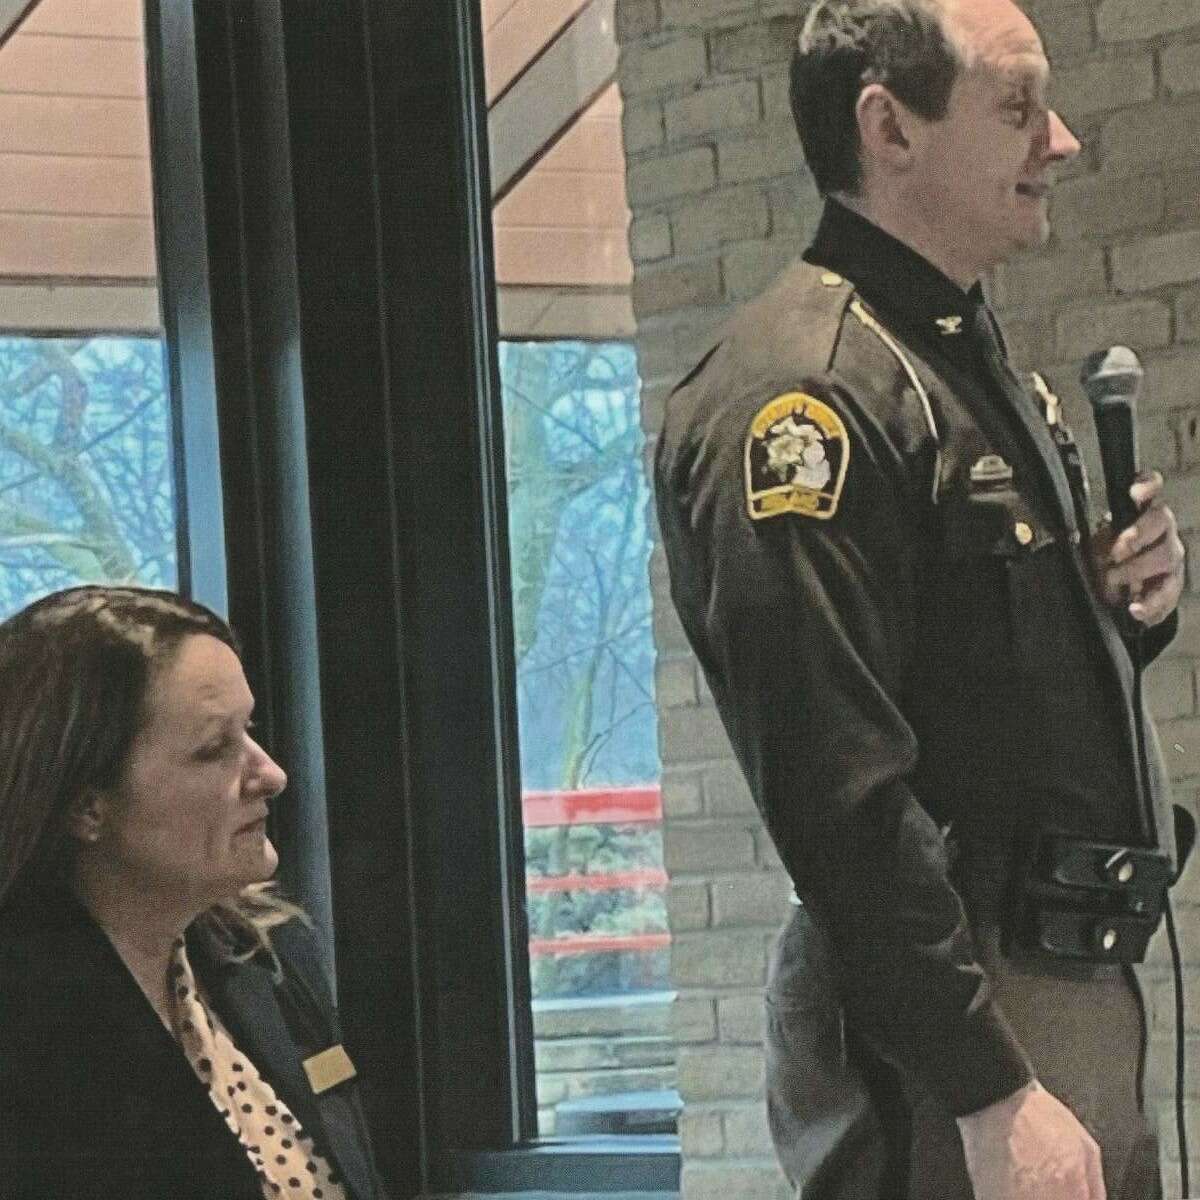 Midland County Sheriff Myron Greene and Midland Police Chief Nicole Ford discussed the challenges they face as law enforcement officers with residents Wednesday, March 23 at Riverside Place as they celebrated Law Day.